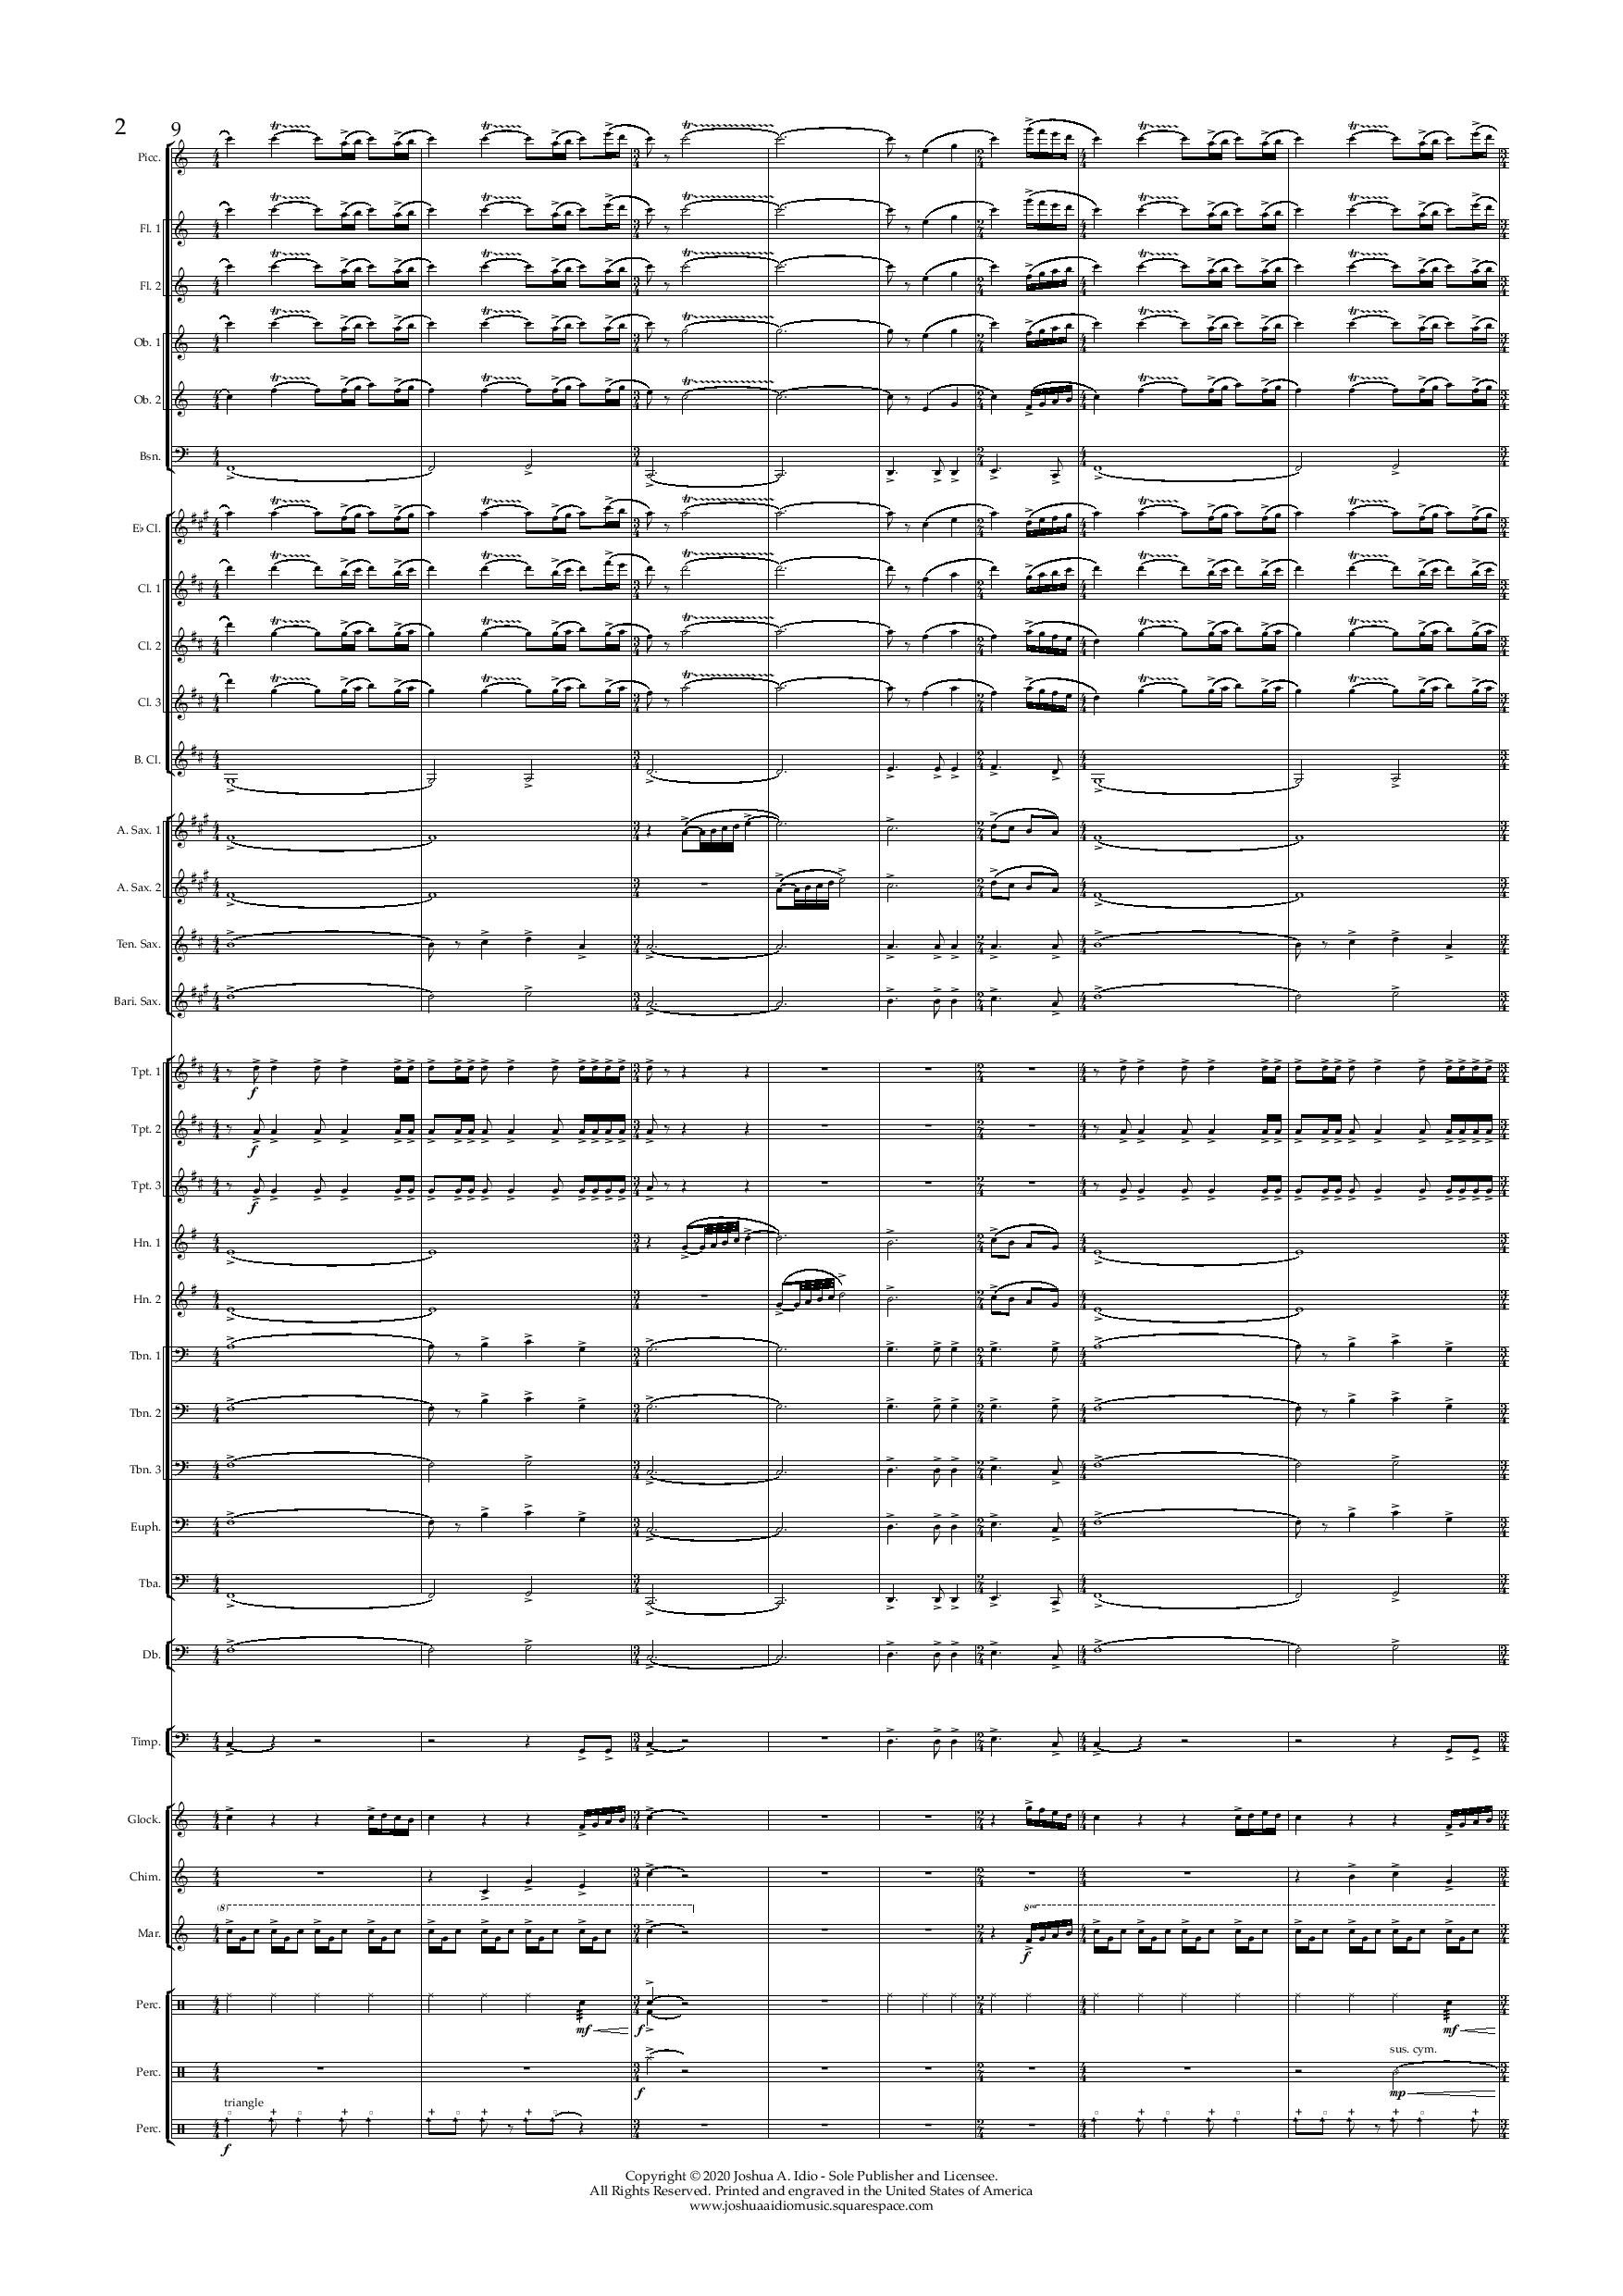 The Cruise Line Dream - Conductor s Score-page-002.jpg